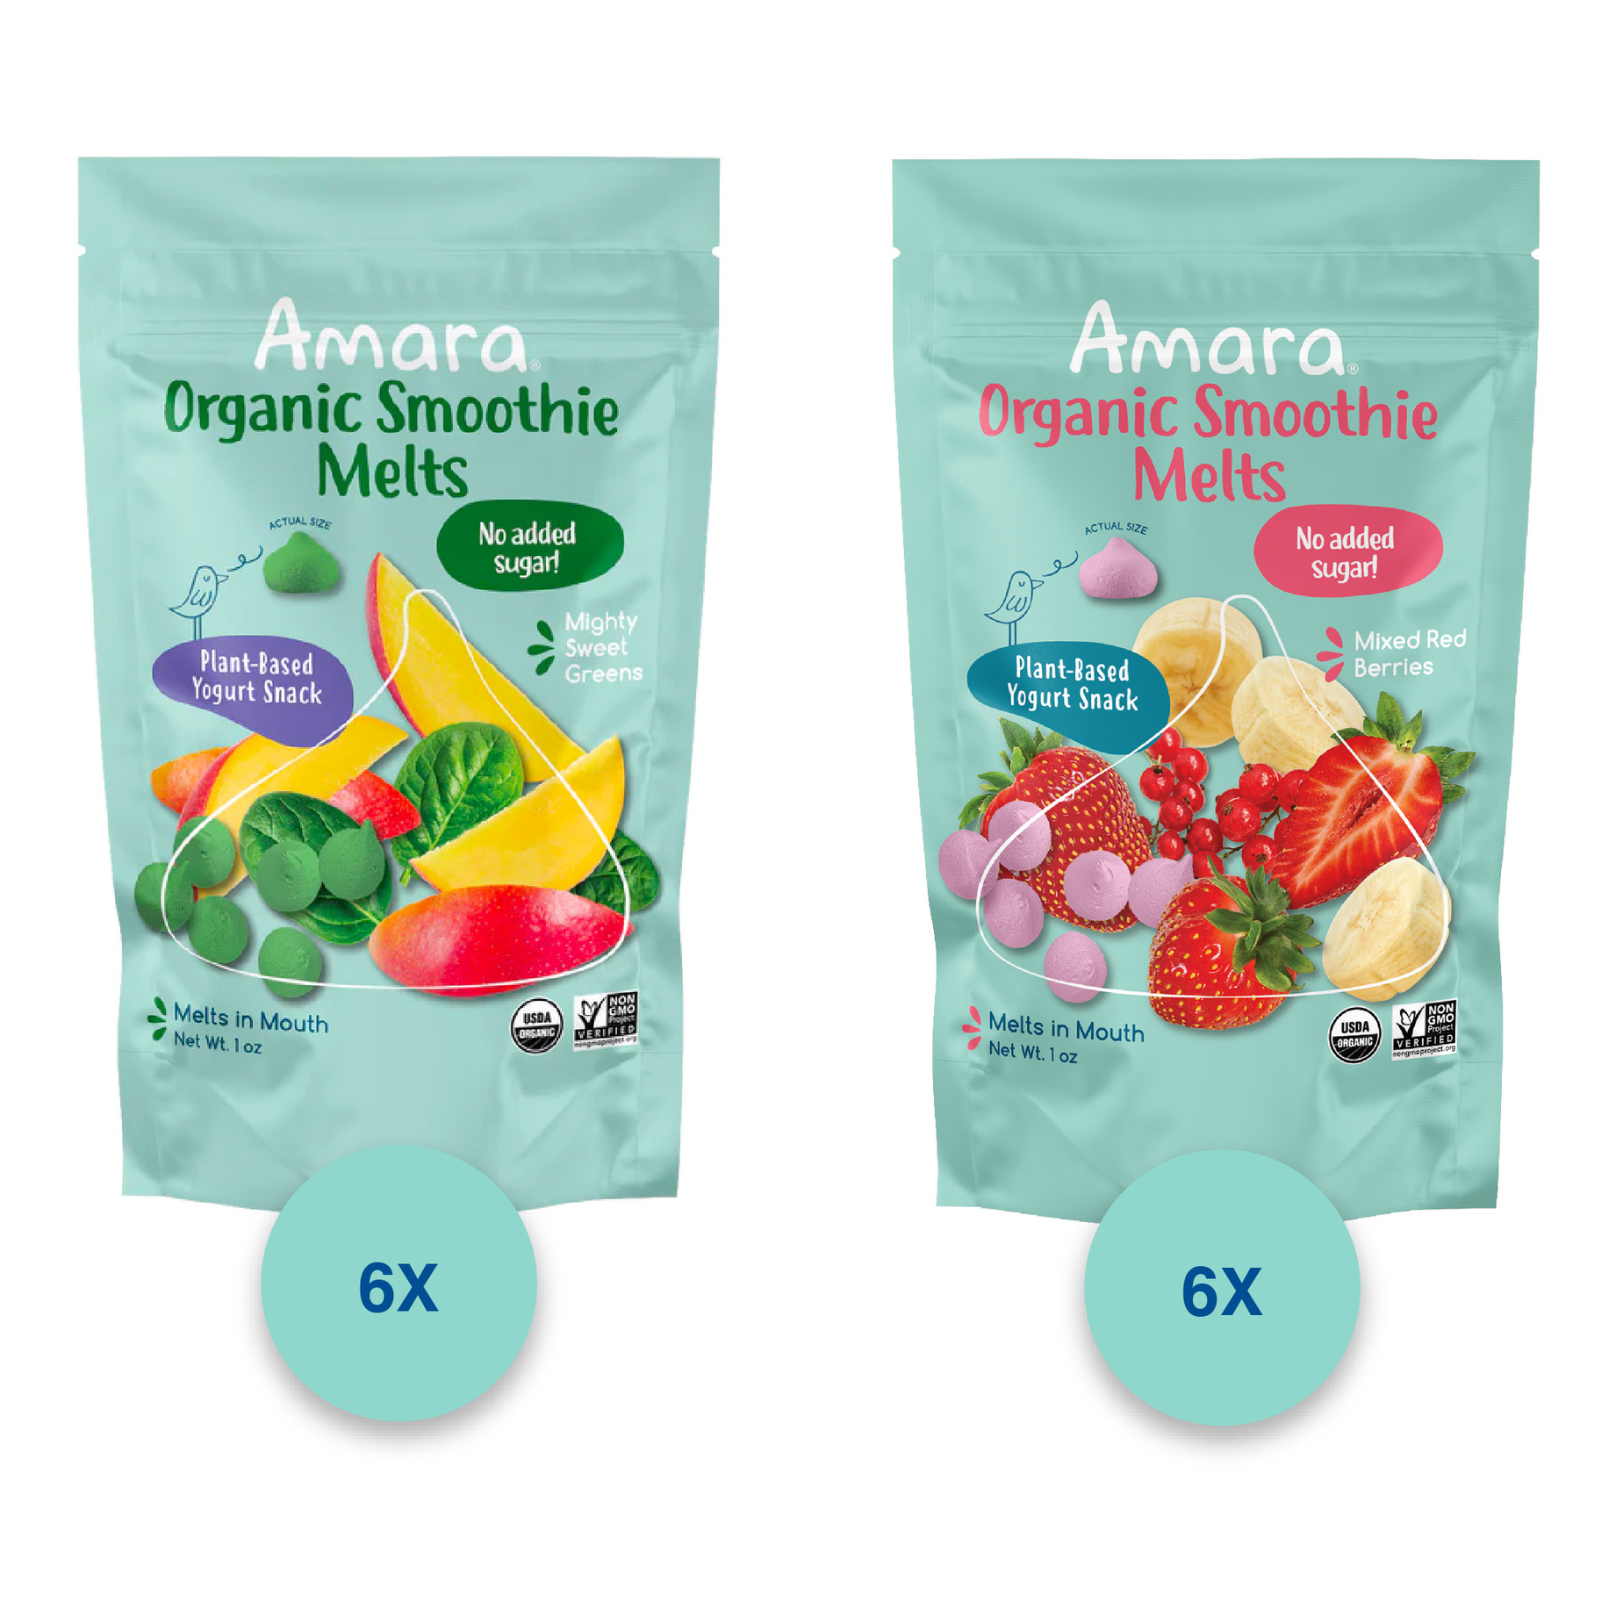 Hygge with Your Baby - Amara Organic Foods